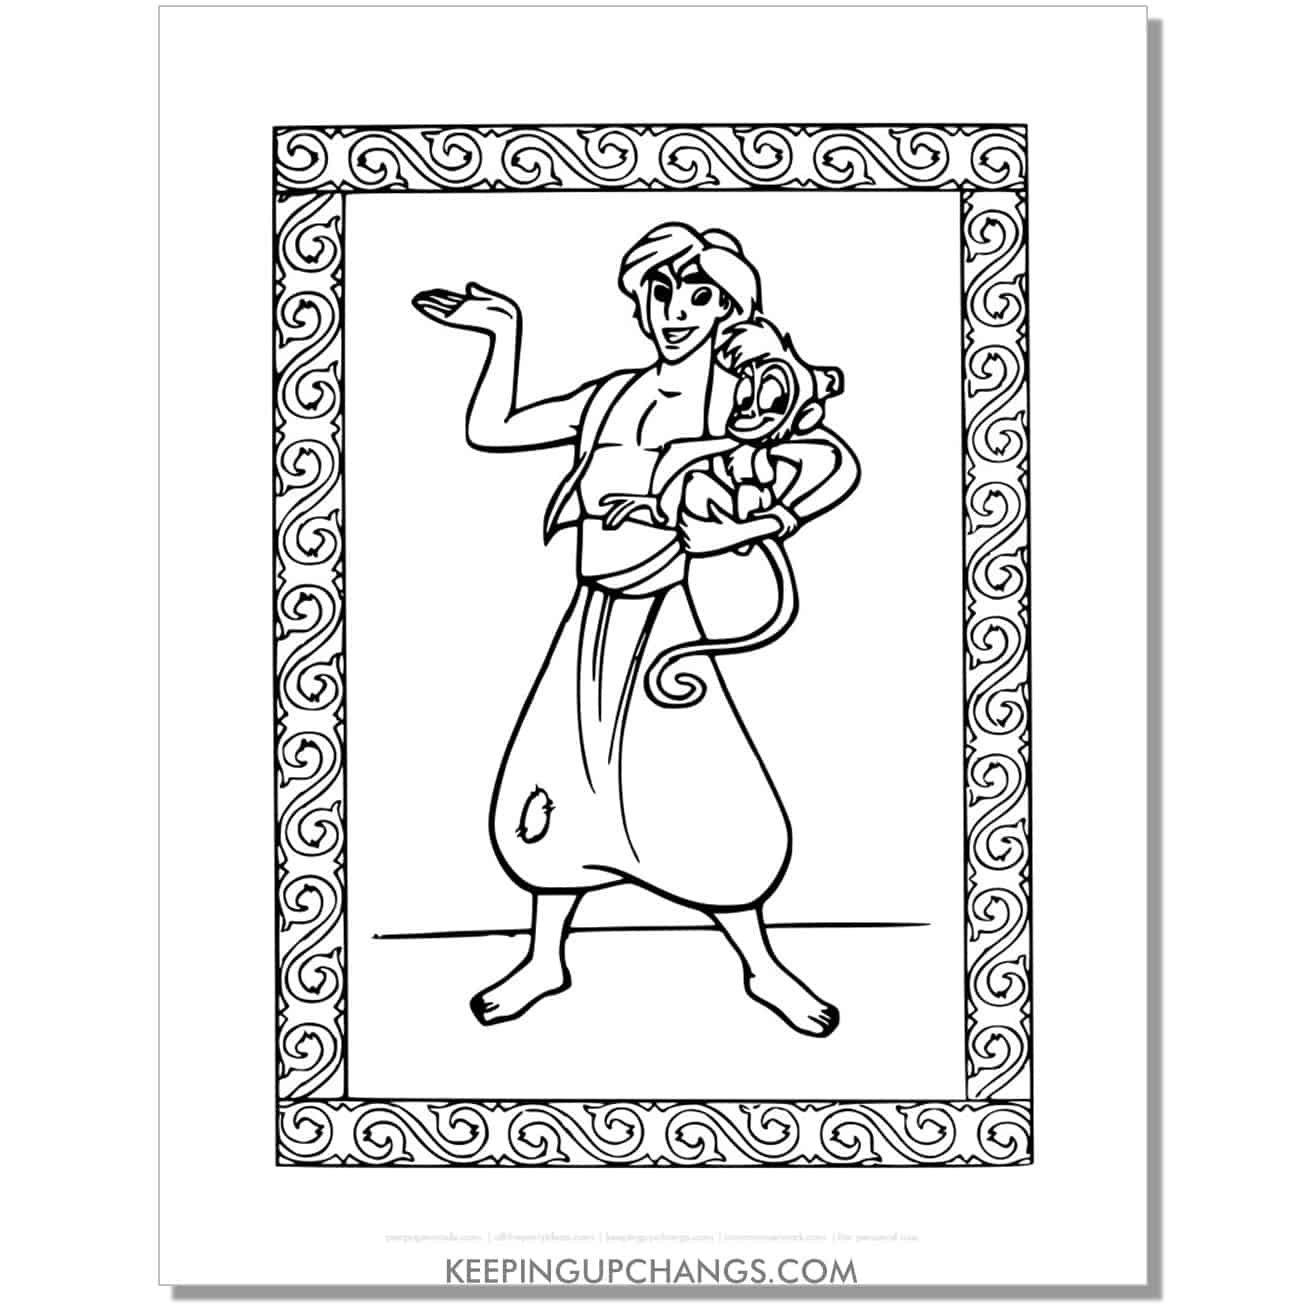 aladdin abu with fancy border coloring page, sheet.